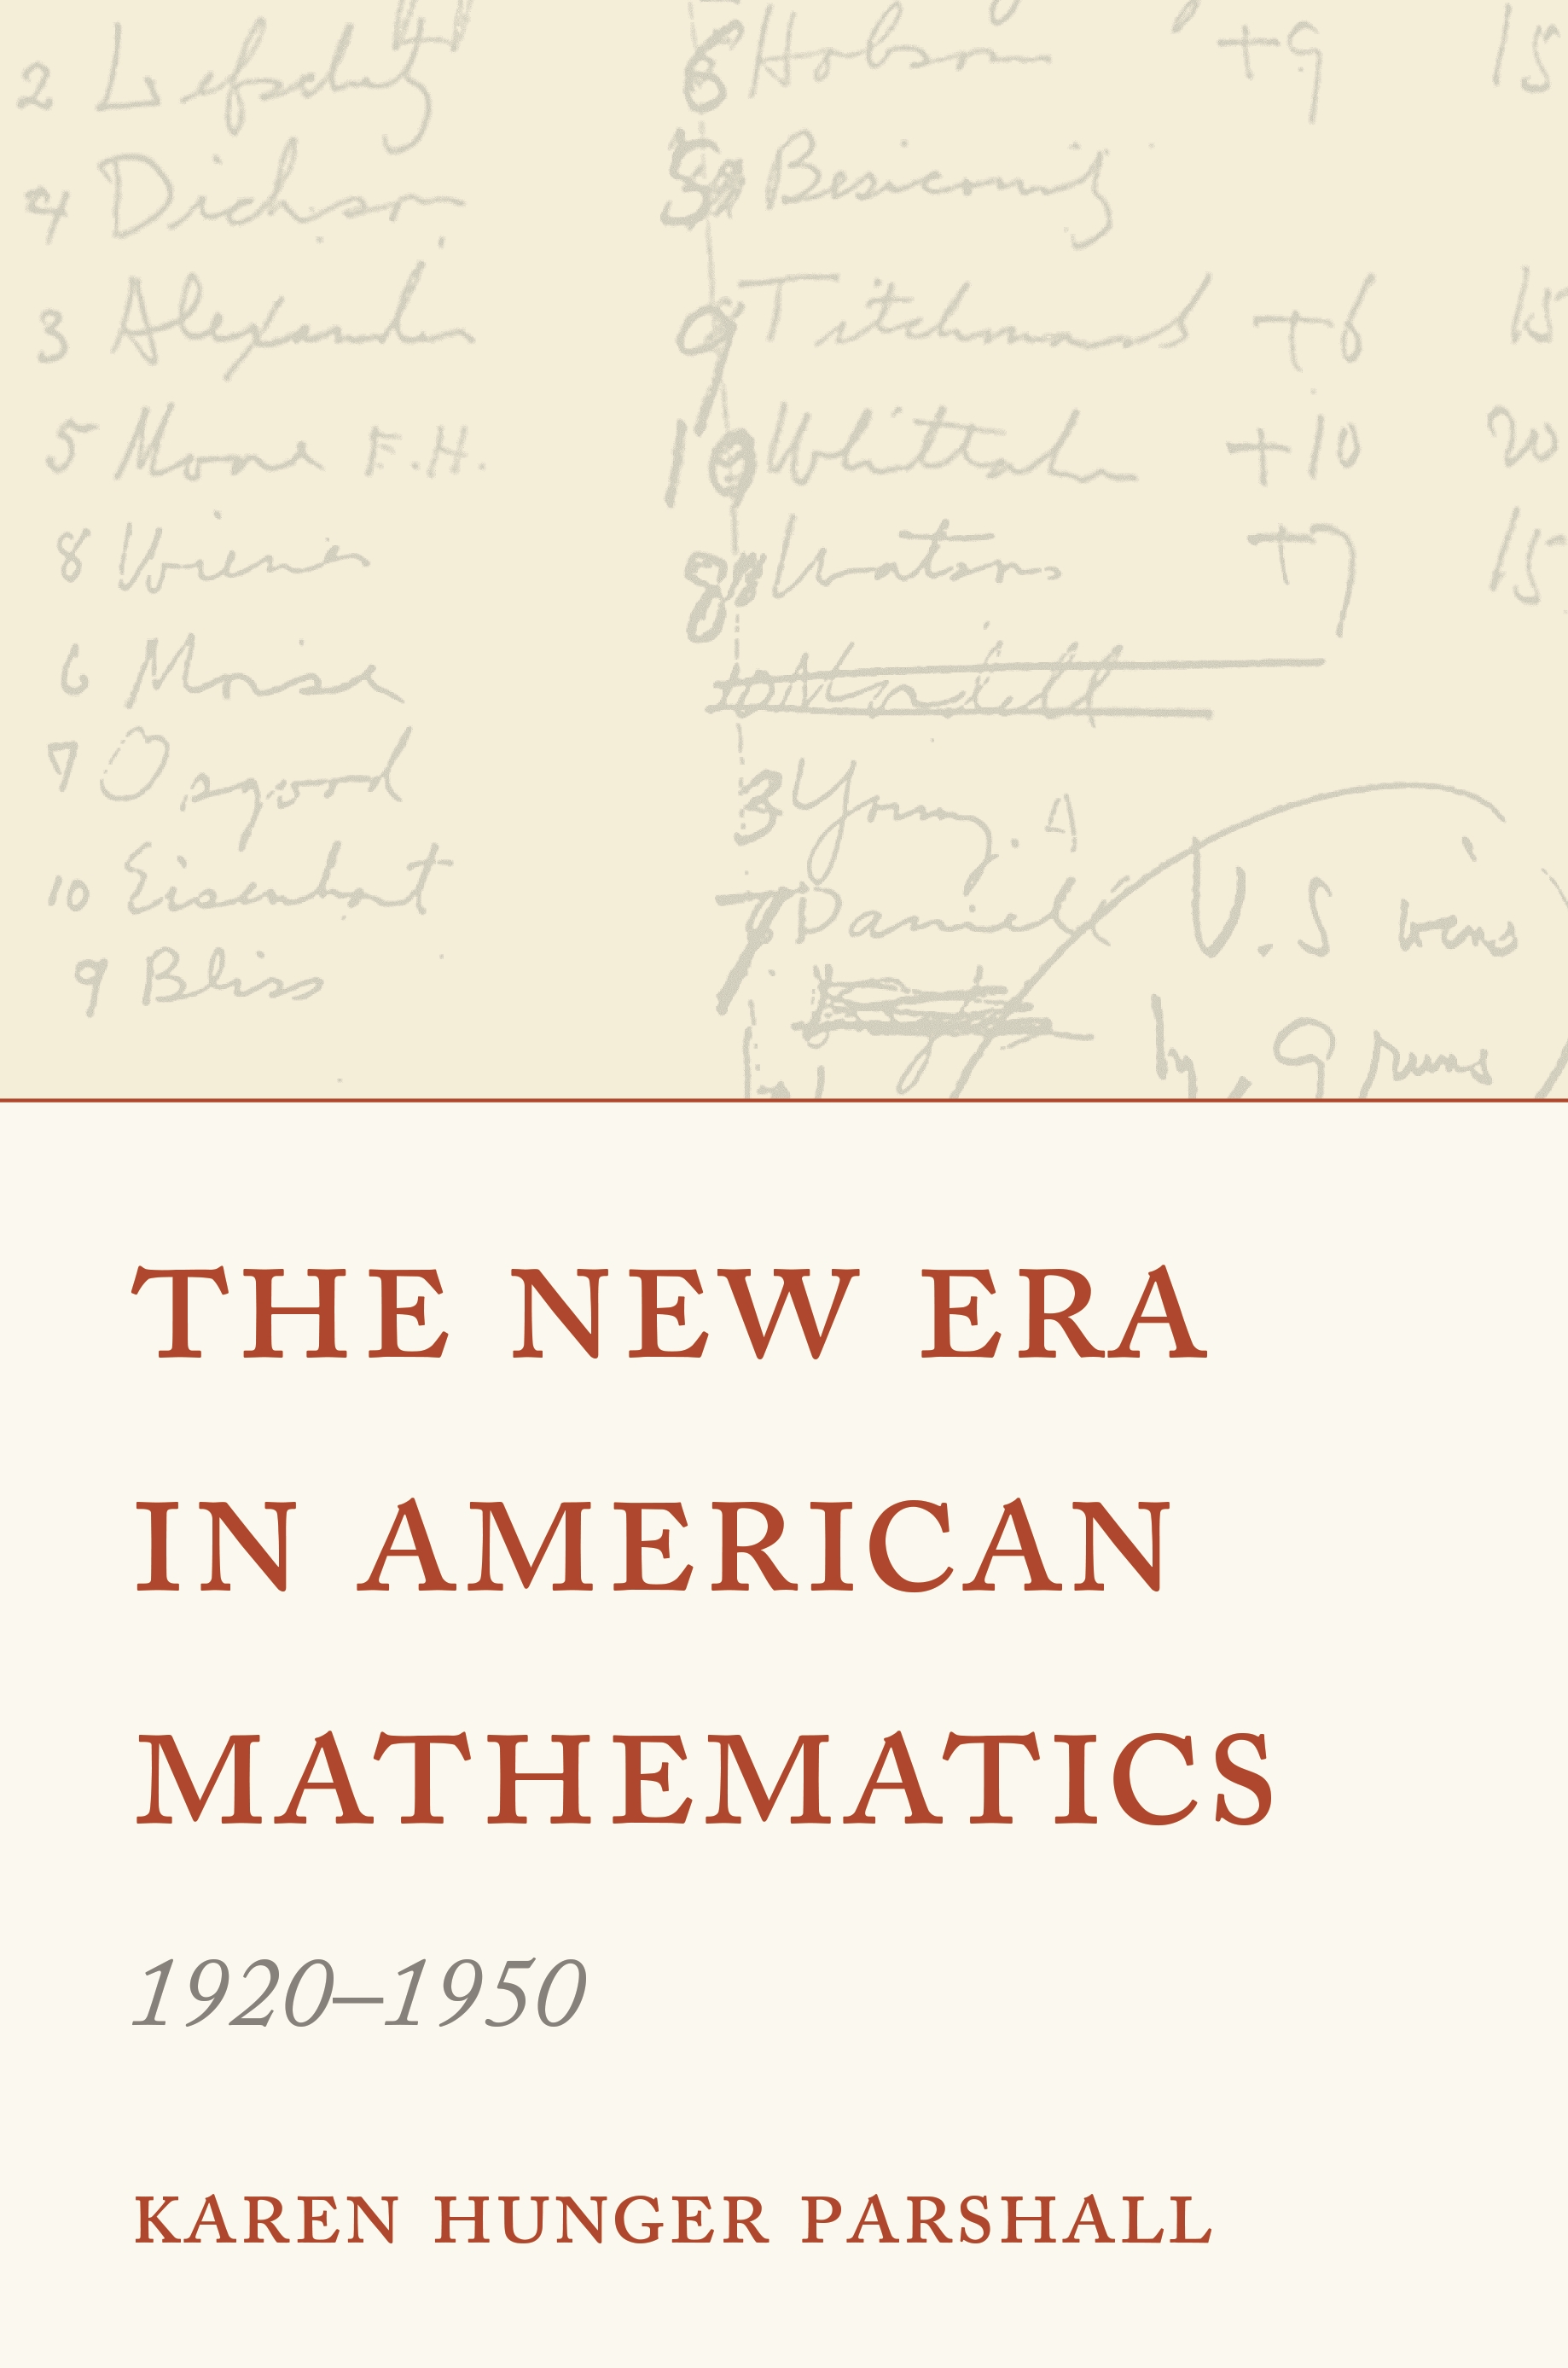 Cover image of the book The New Era in American Mathematics, 1920-1950 by Karen Hunger Parshall